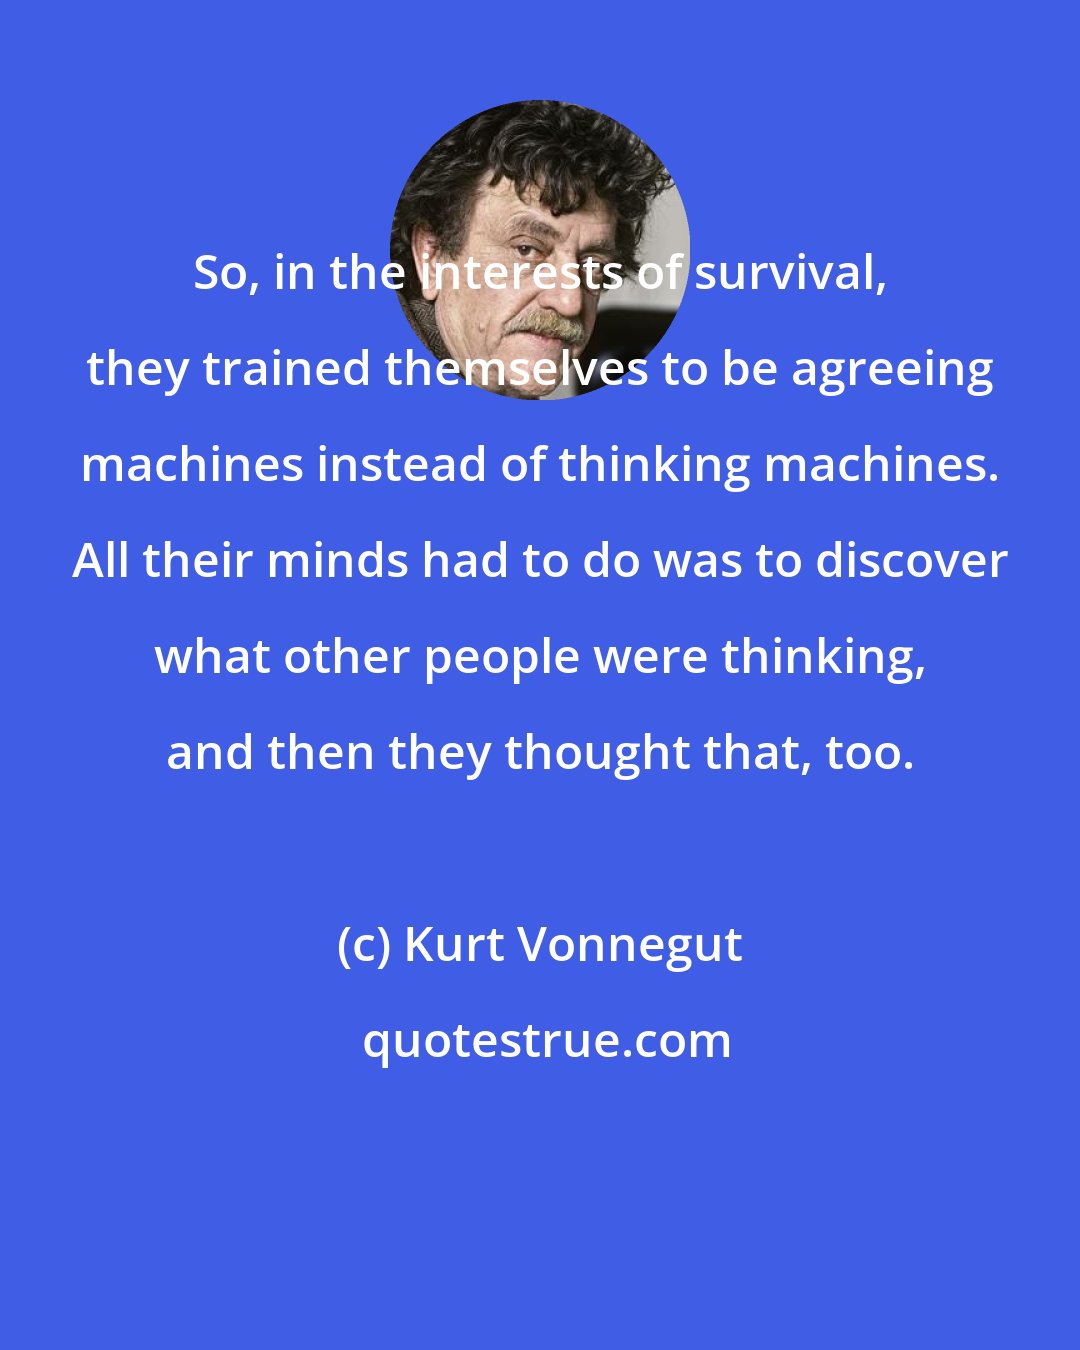 Kurt Vonnegut: So, in the interests of survival, they trained themselves to be agreeing machines instead of thinking machines. All their minds had to do was to discover what other people were thinking, and then they thought that, too.